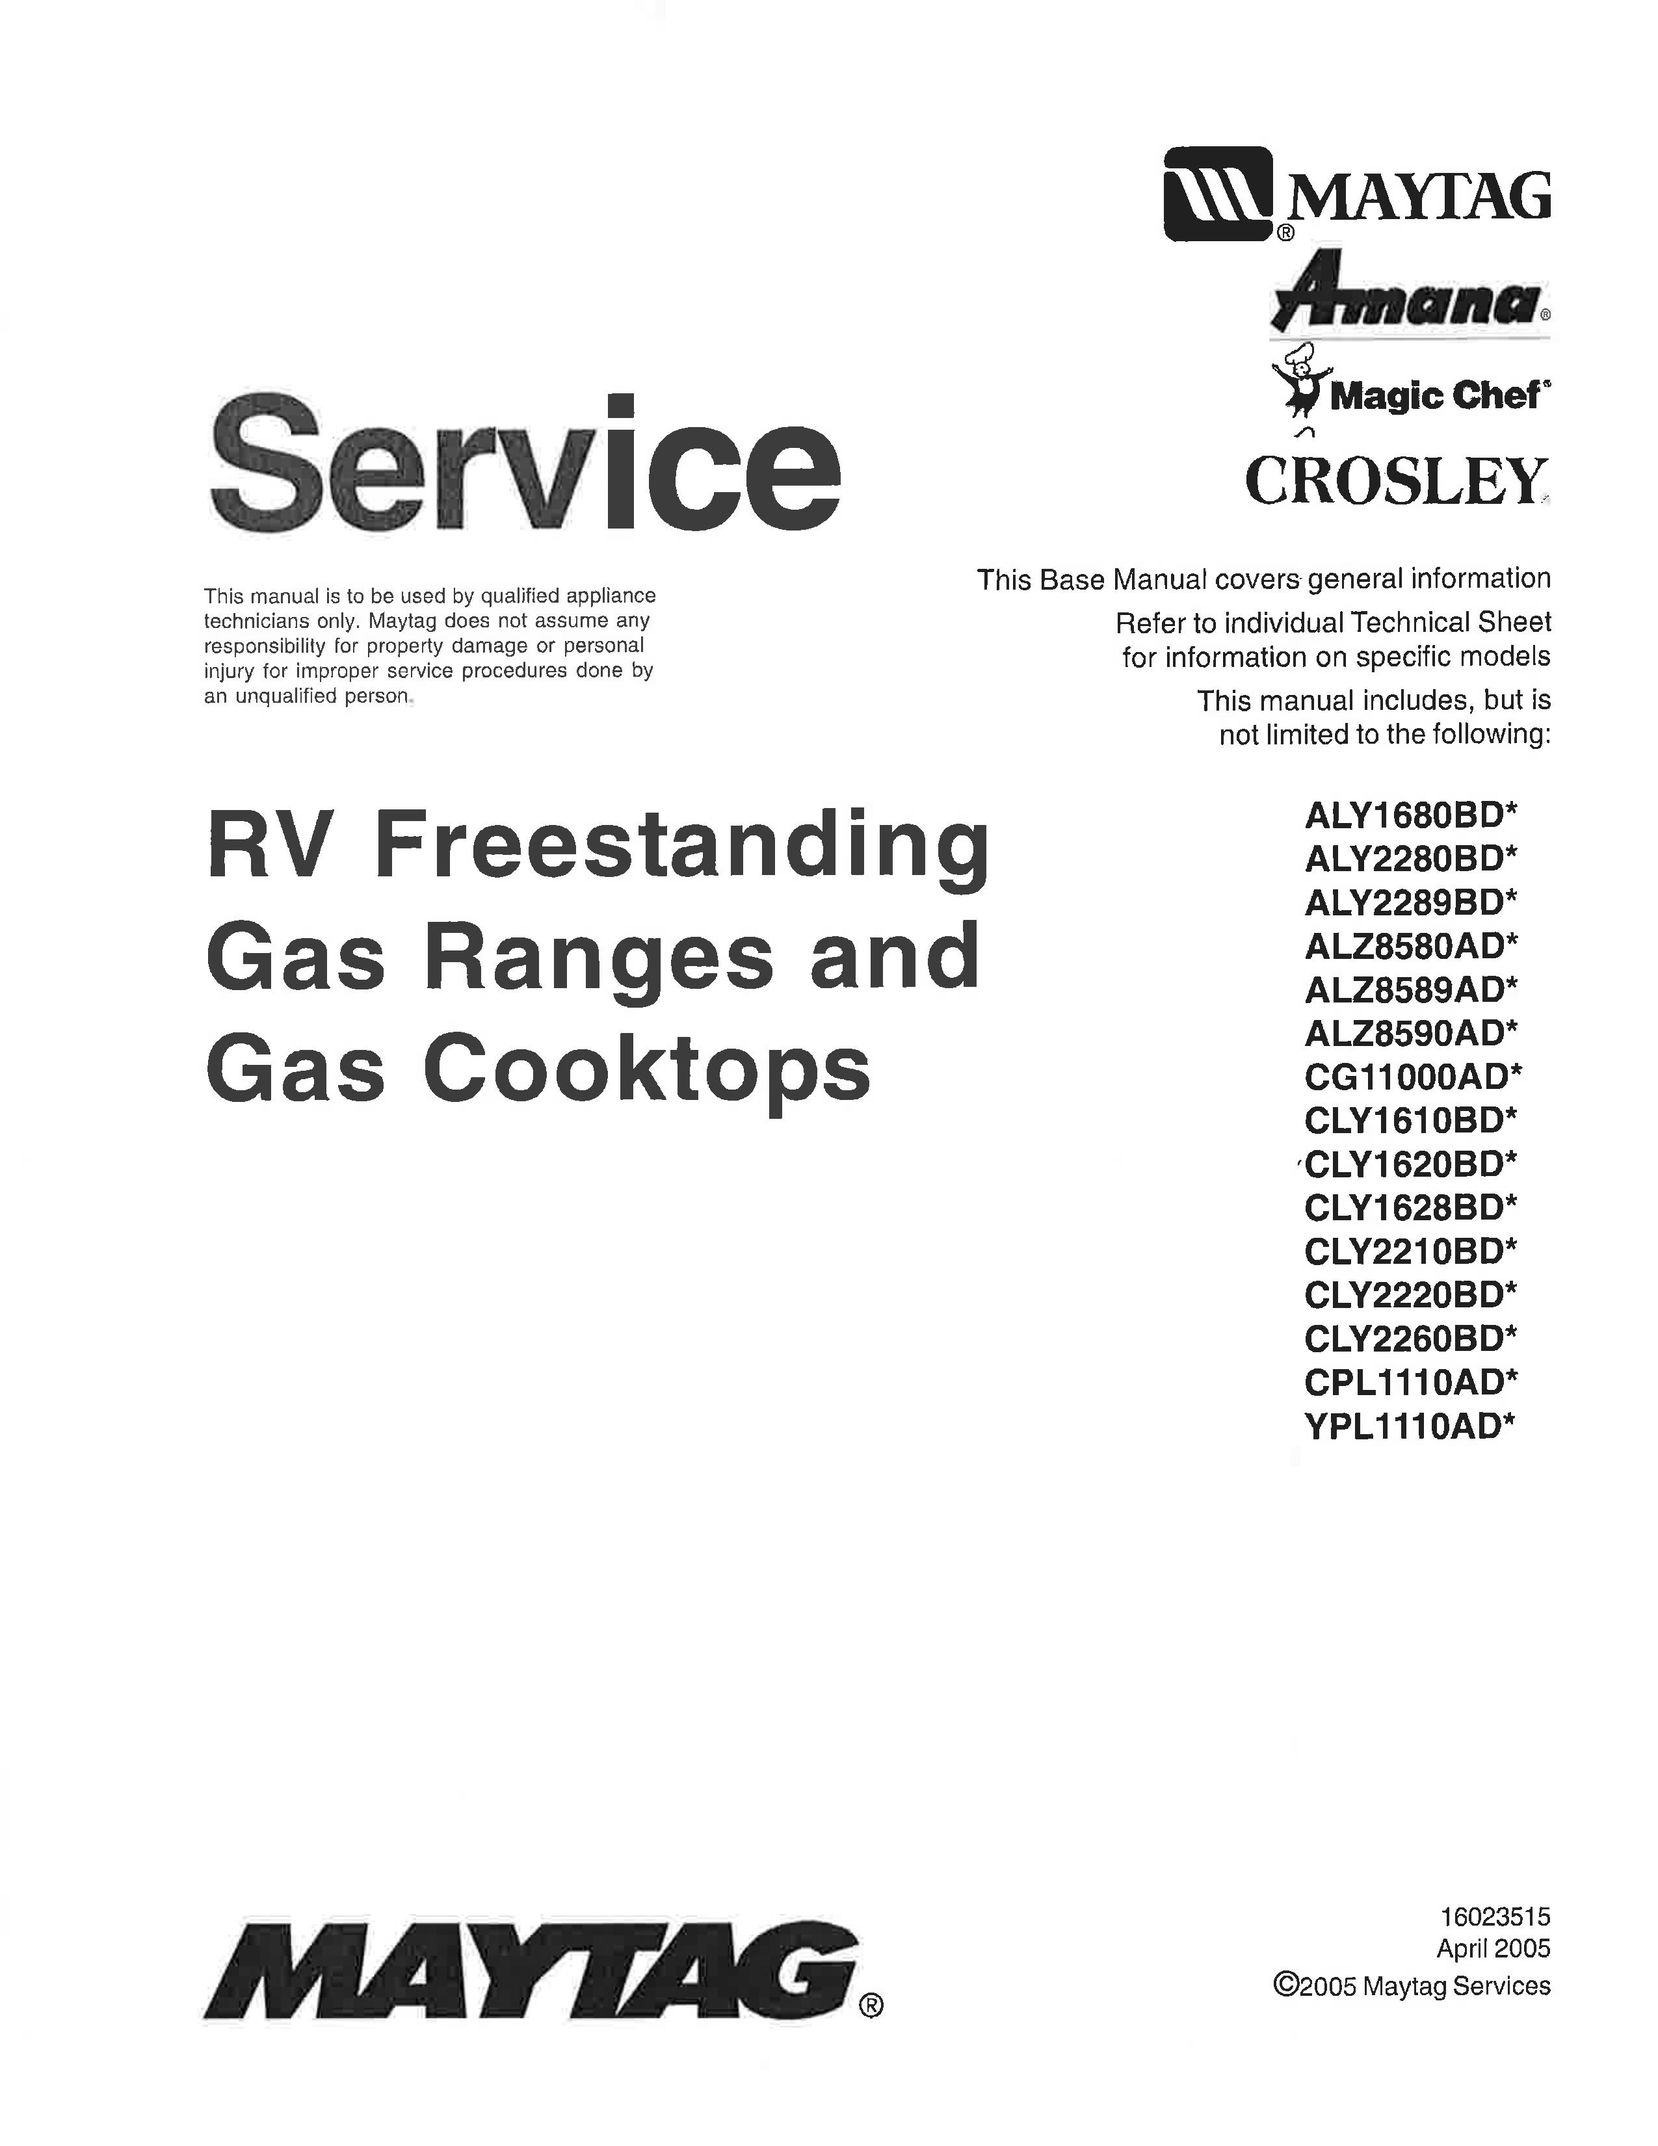 Maytag ALZ8589AD Cooktop User Manual